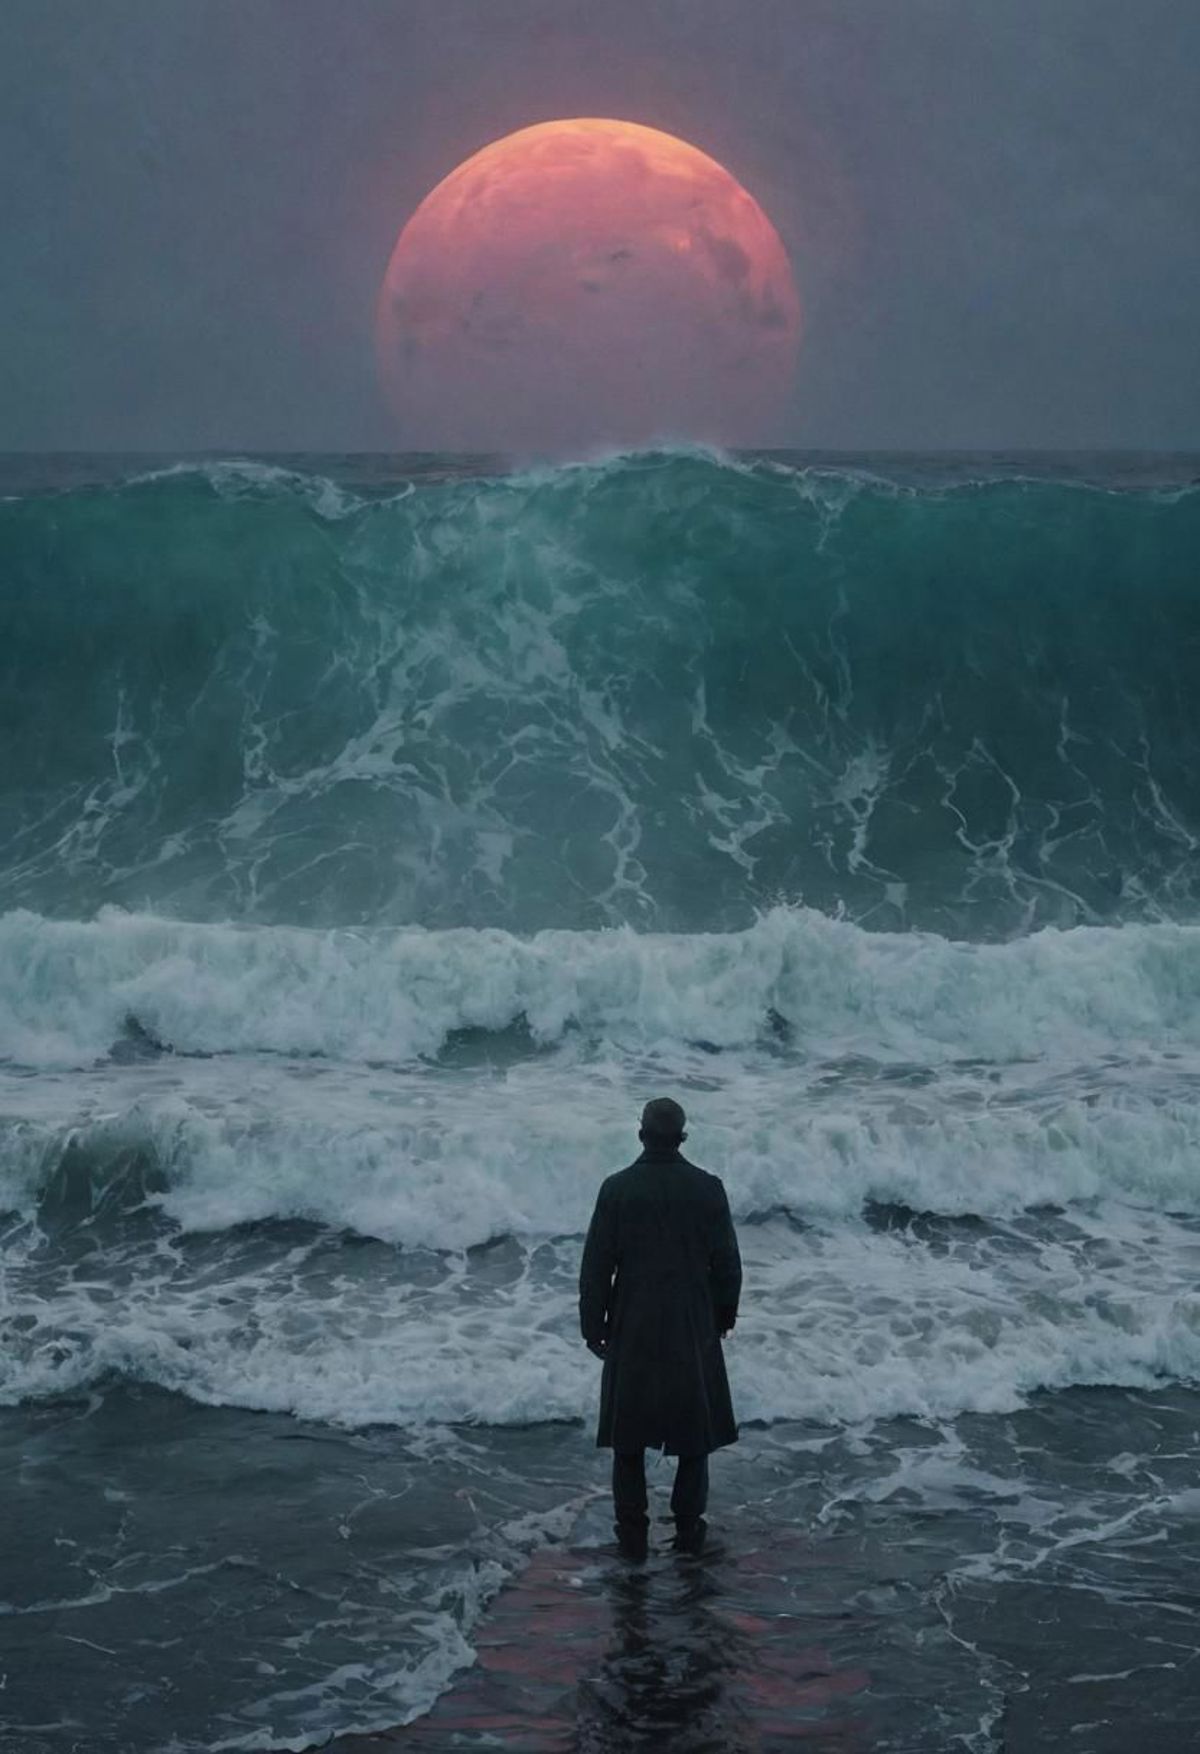 A man standing on the beach, watching the sunset over the ocean.